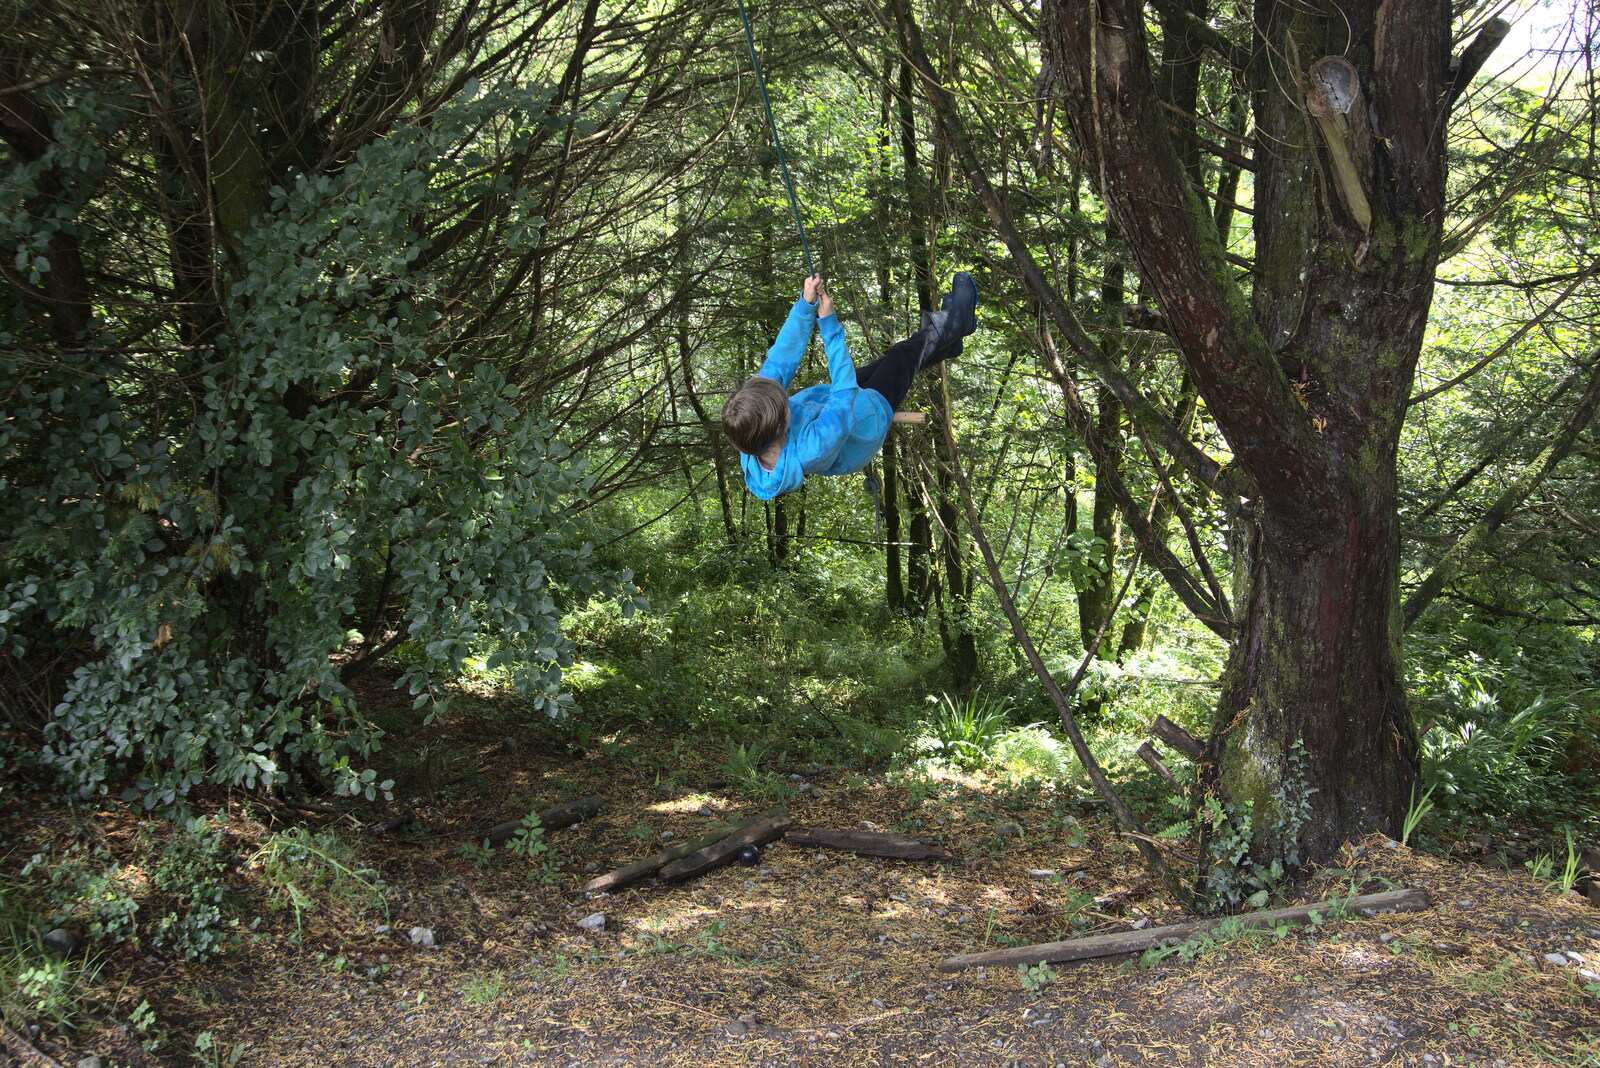 Pints of Guinness and Streedagh Beach, Grange and Sligo, Ireland - 9th August 2021: Harry swings around in the trees